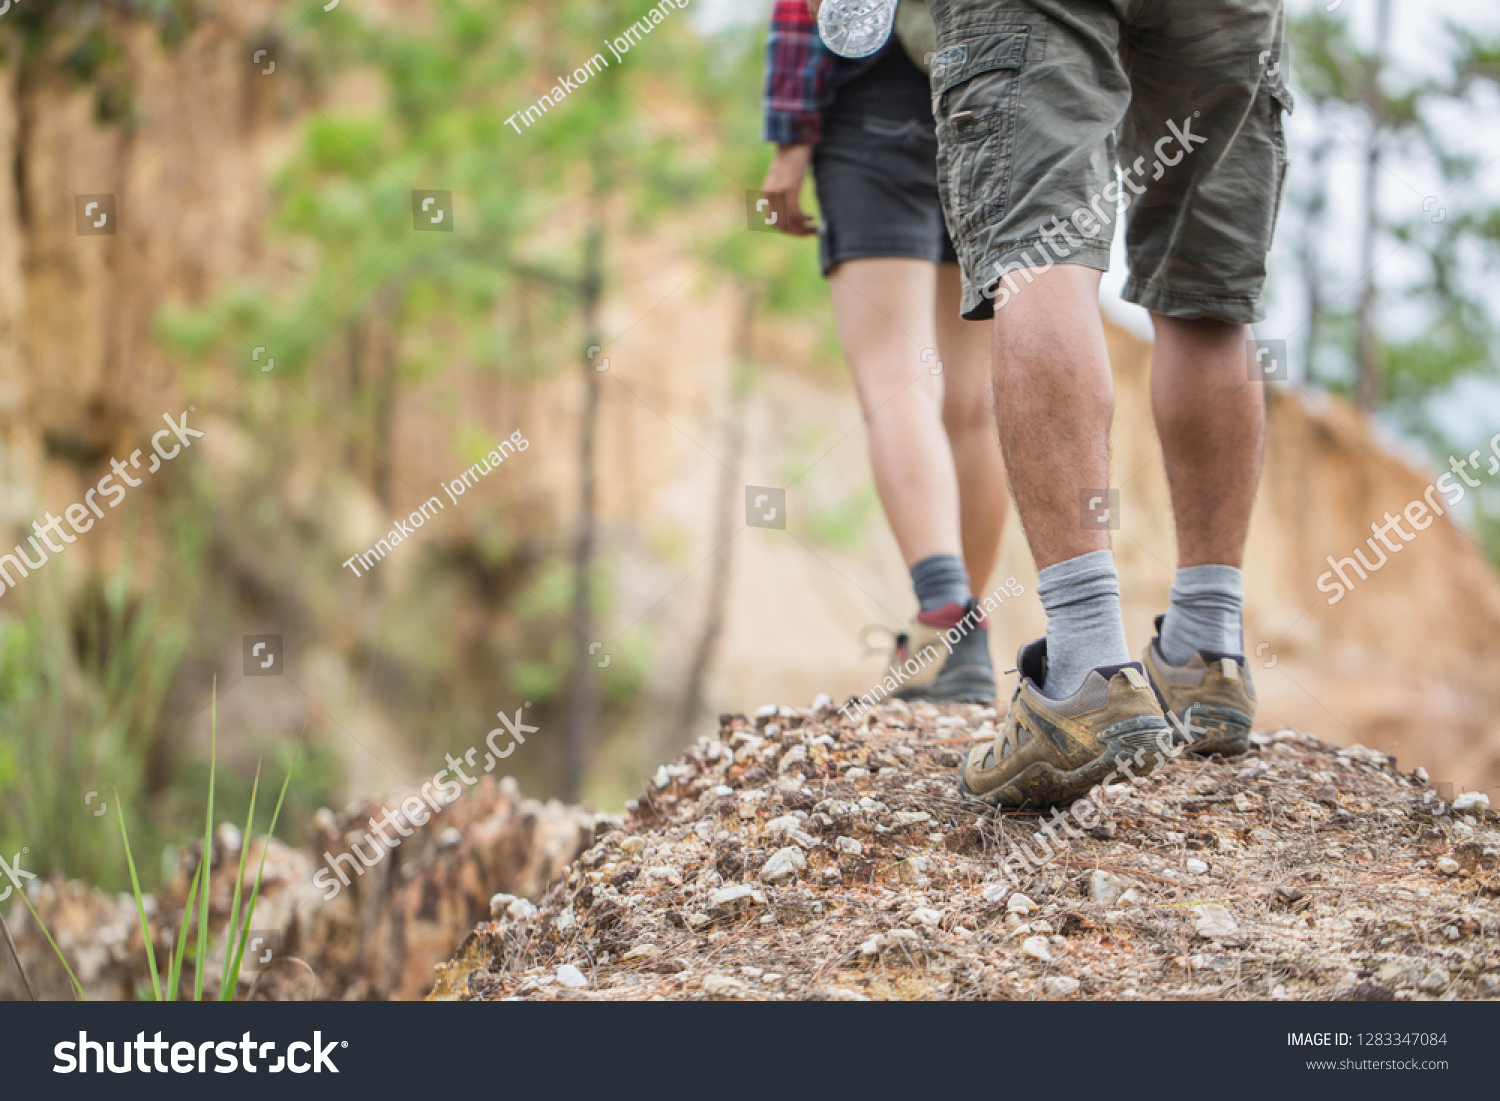  Group of man and women are walking trough forest path wearing mountain boots and walking sticks. Low section view. #1283347084